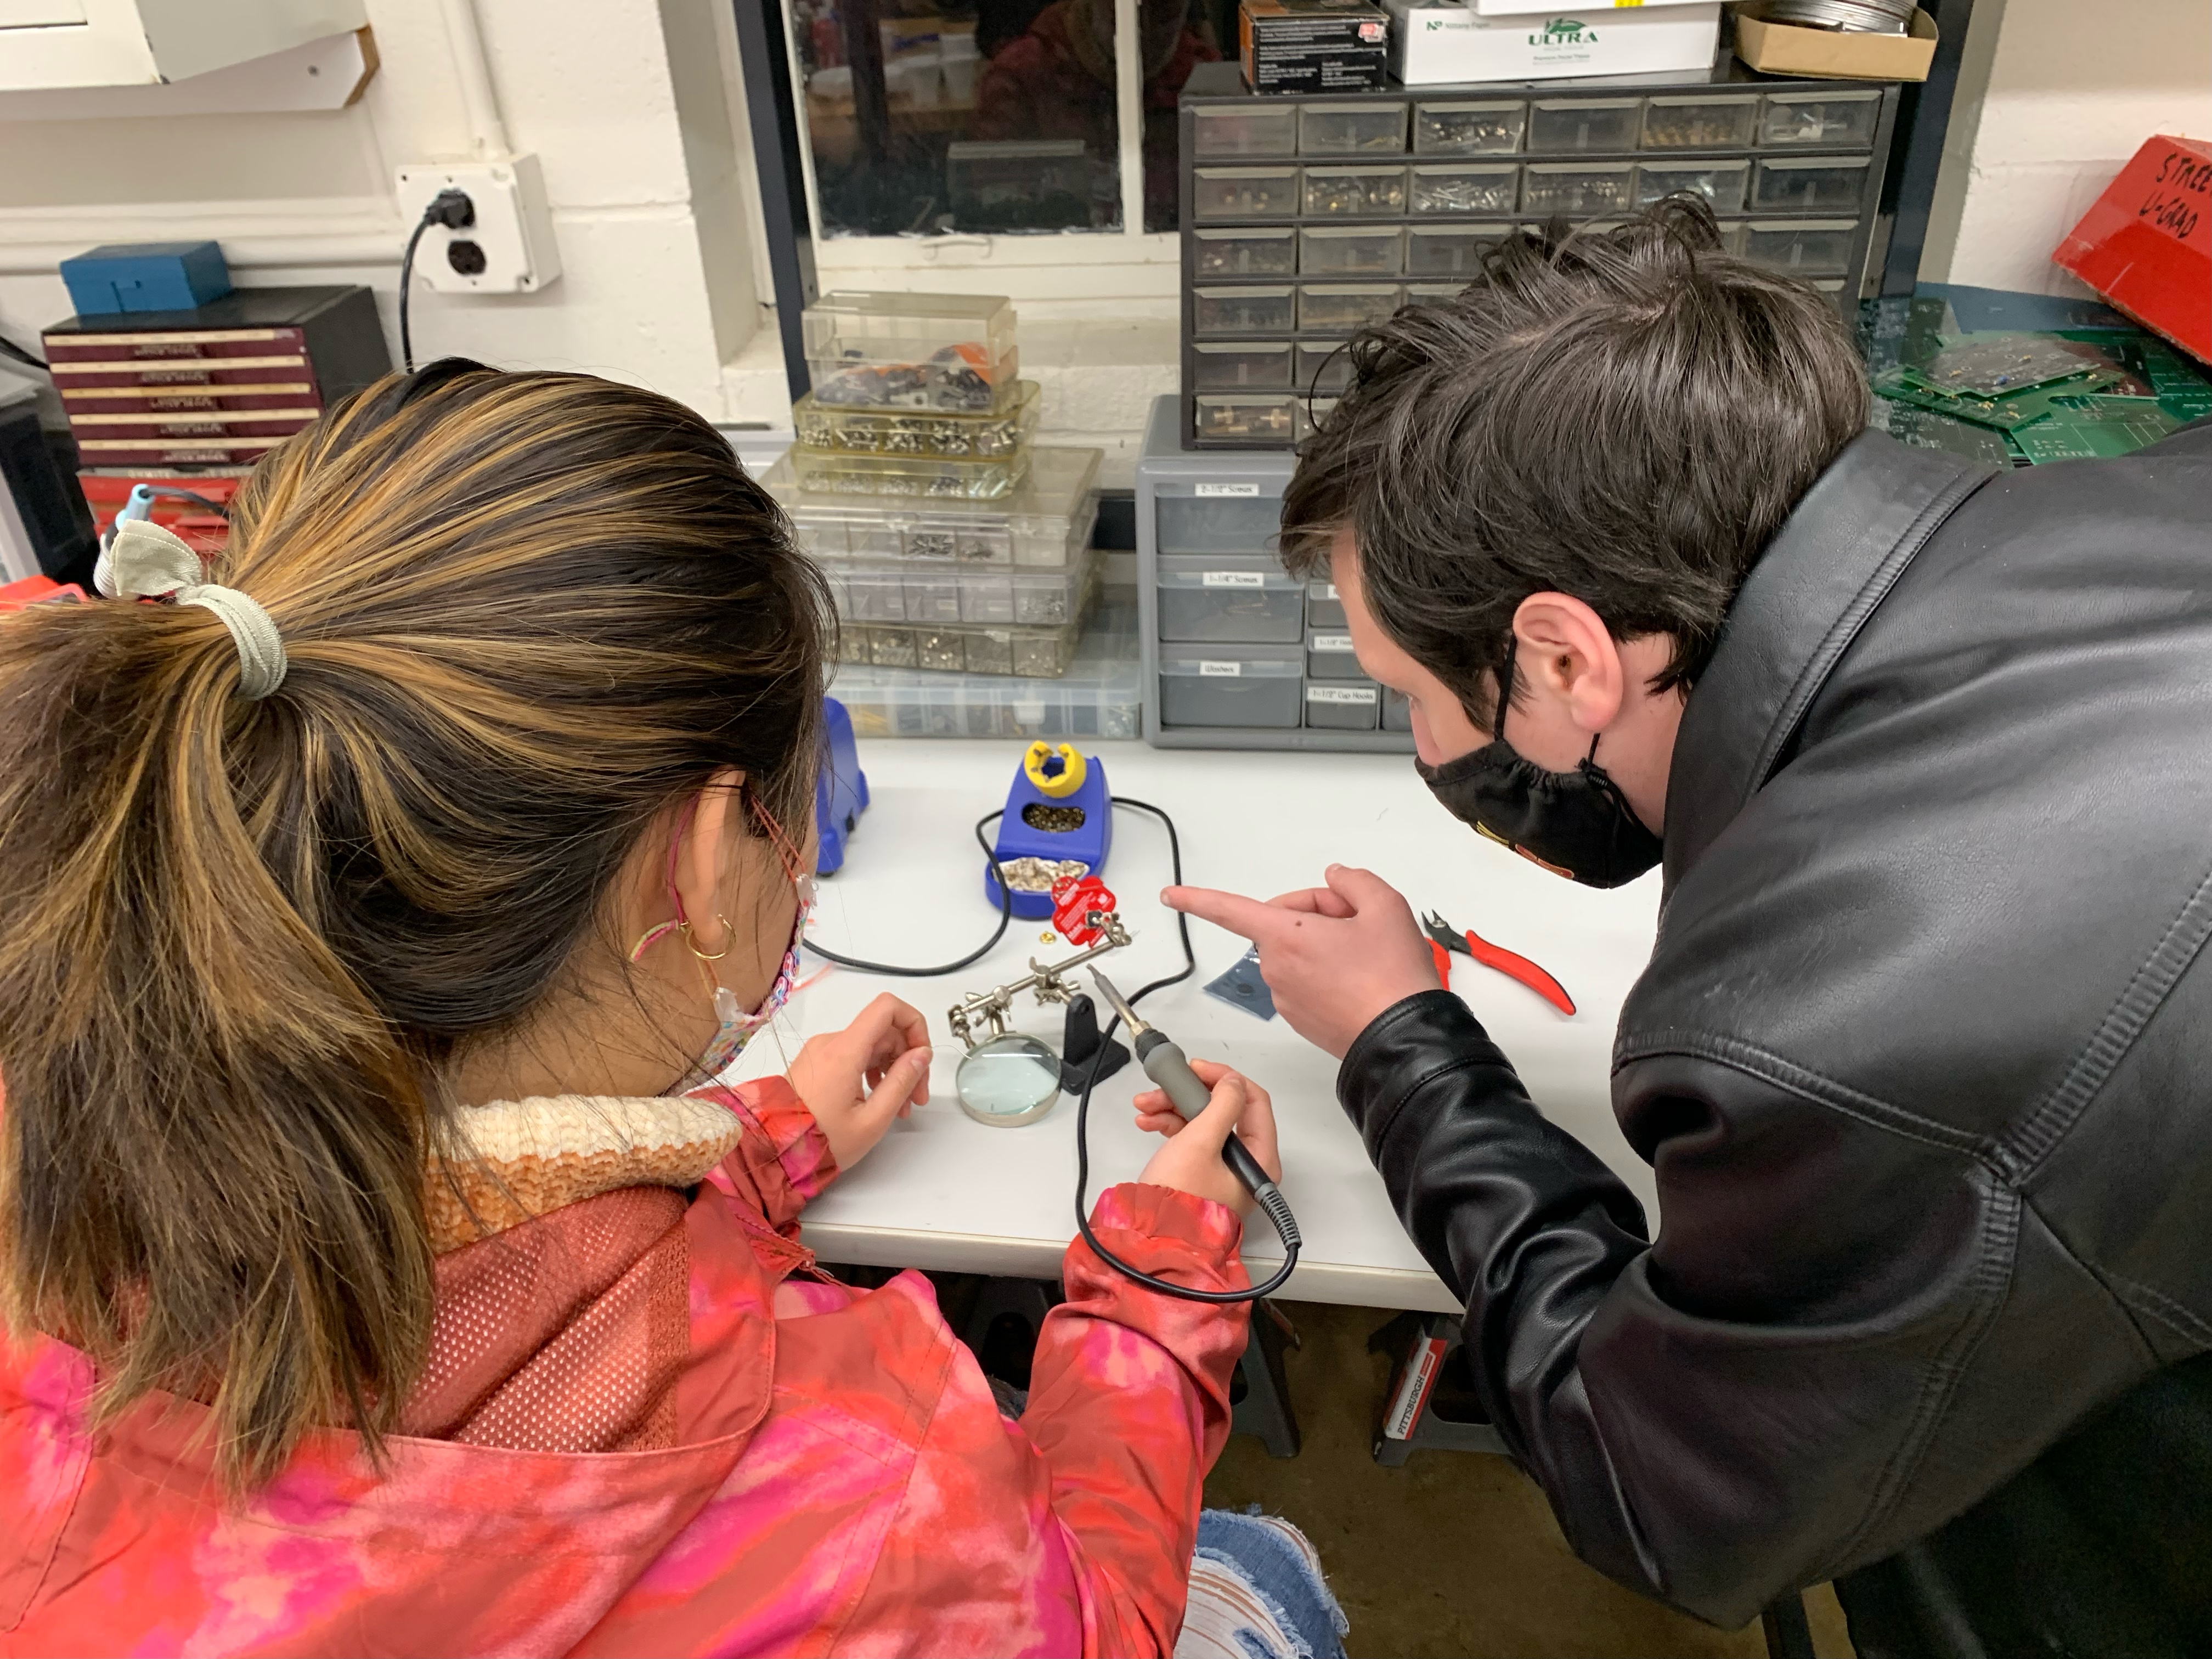 Jake Lyon (right) teaches a student how to solder a simple circuit at the UMD Physics Vortex Makerspace.